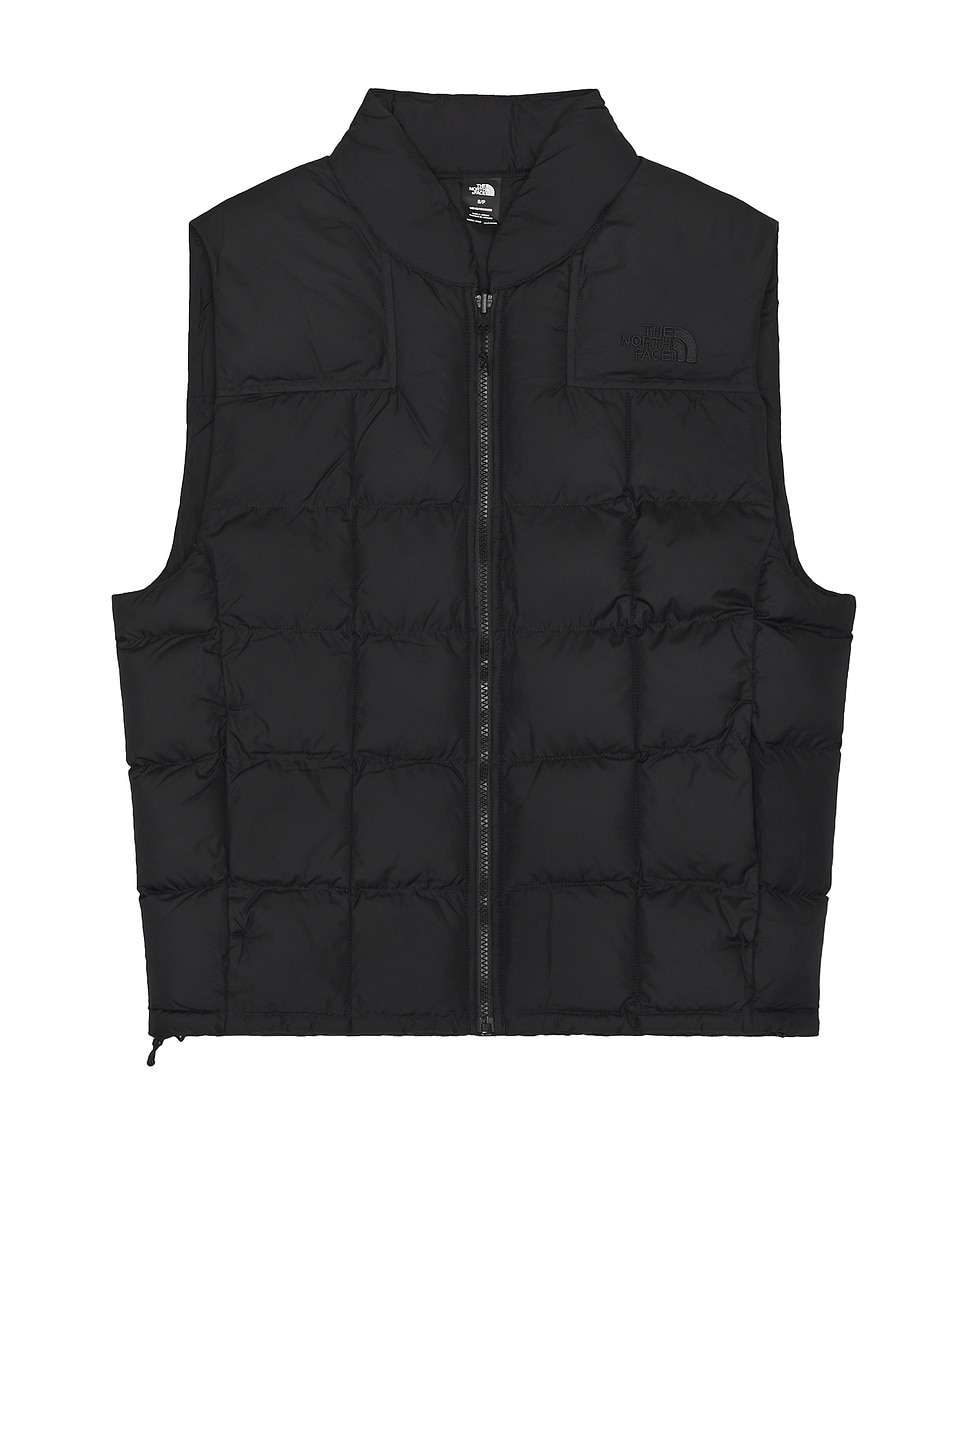 Image 1 of The North Face Lhotse Reversible Vest in Tnf Black